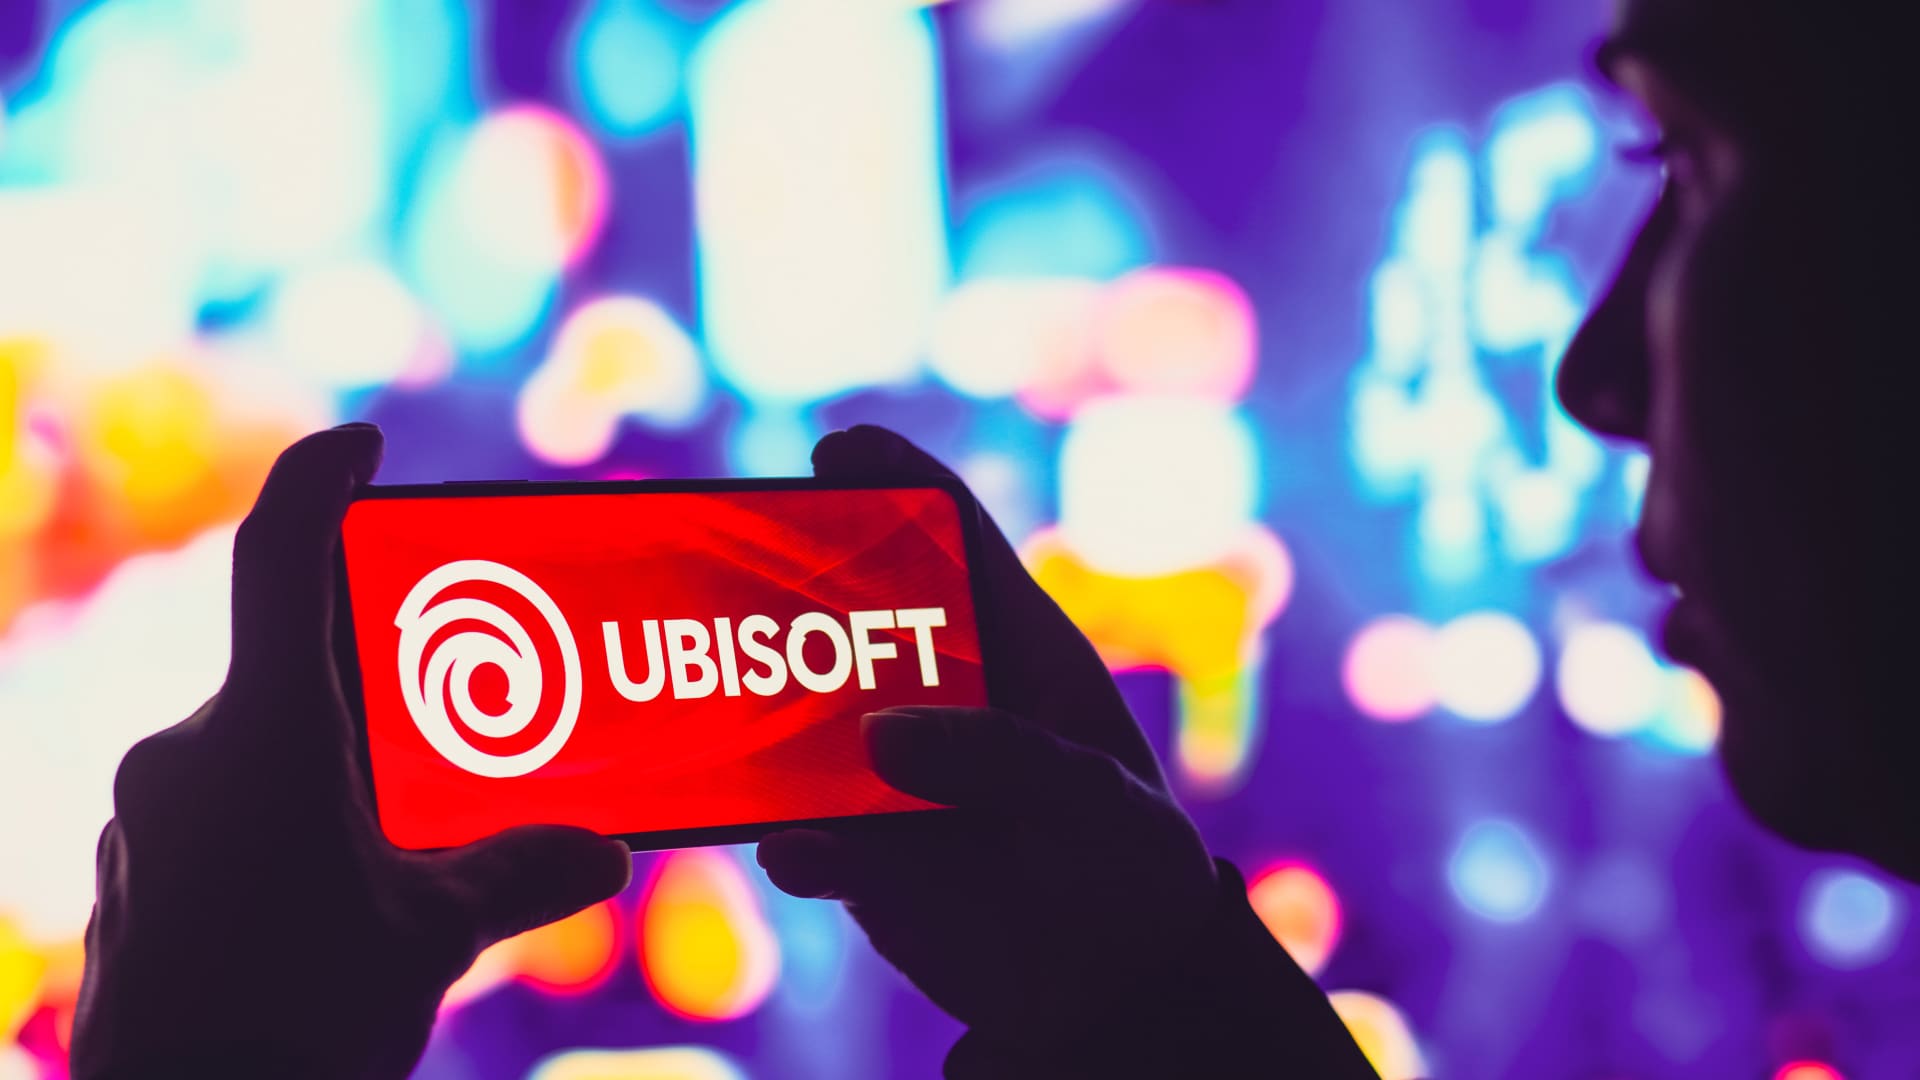 Ubisoft cancels three games and slashes targets, citing ‘worsening macroeconomic conditions’